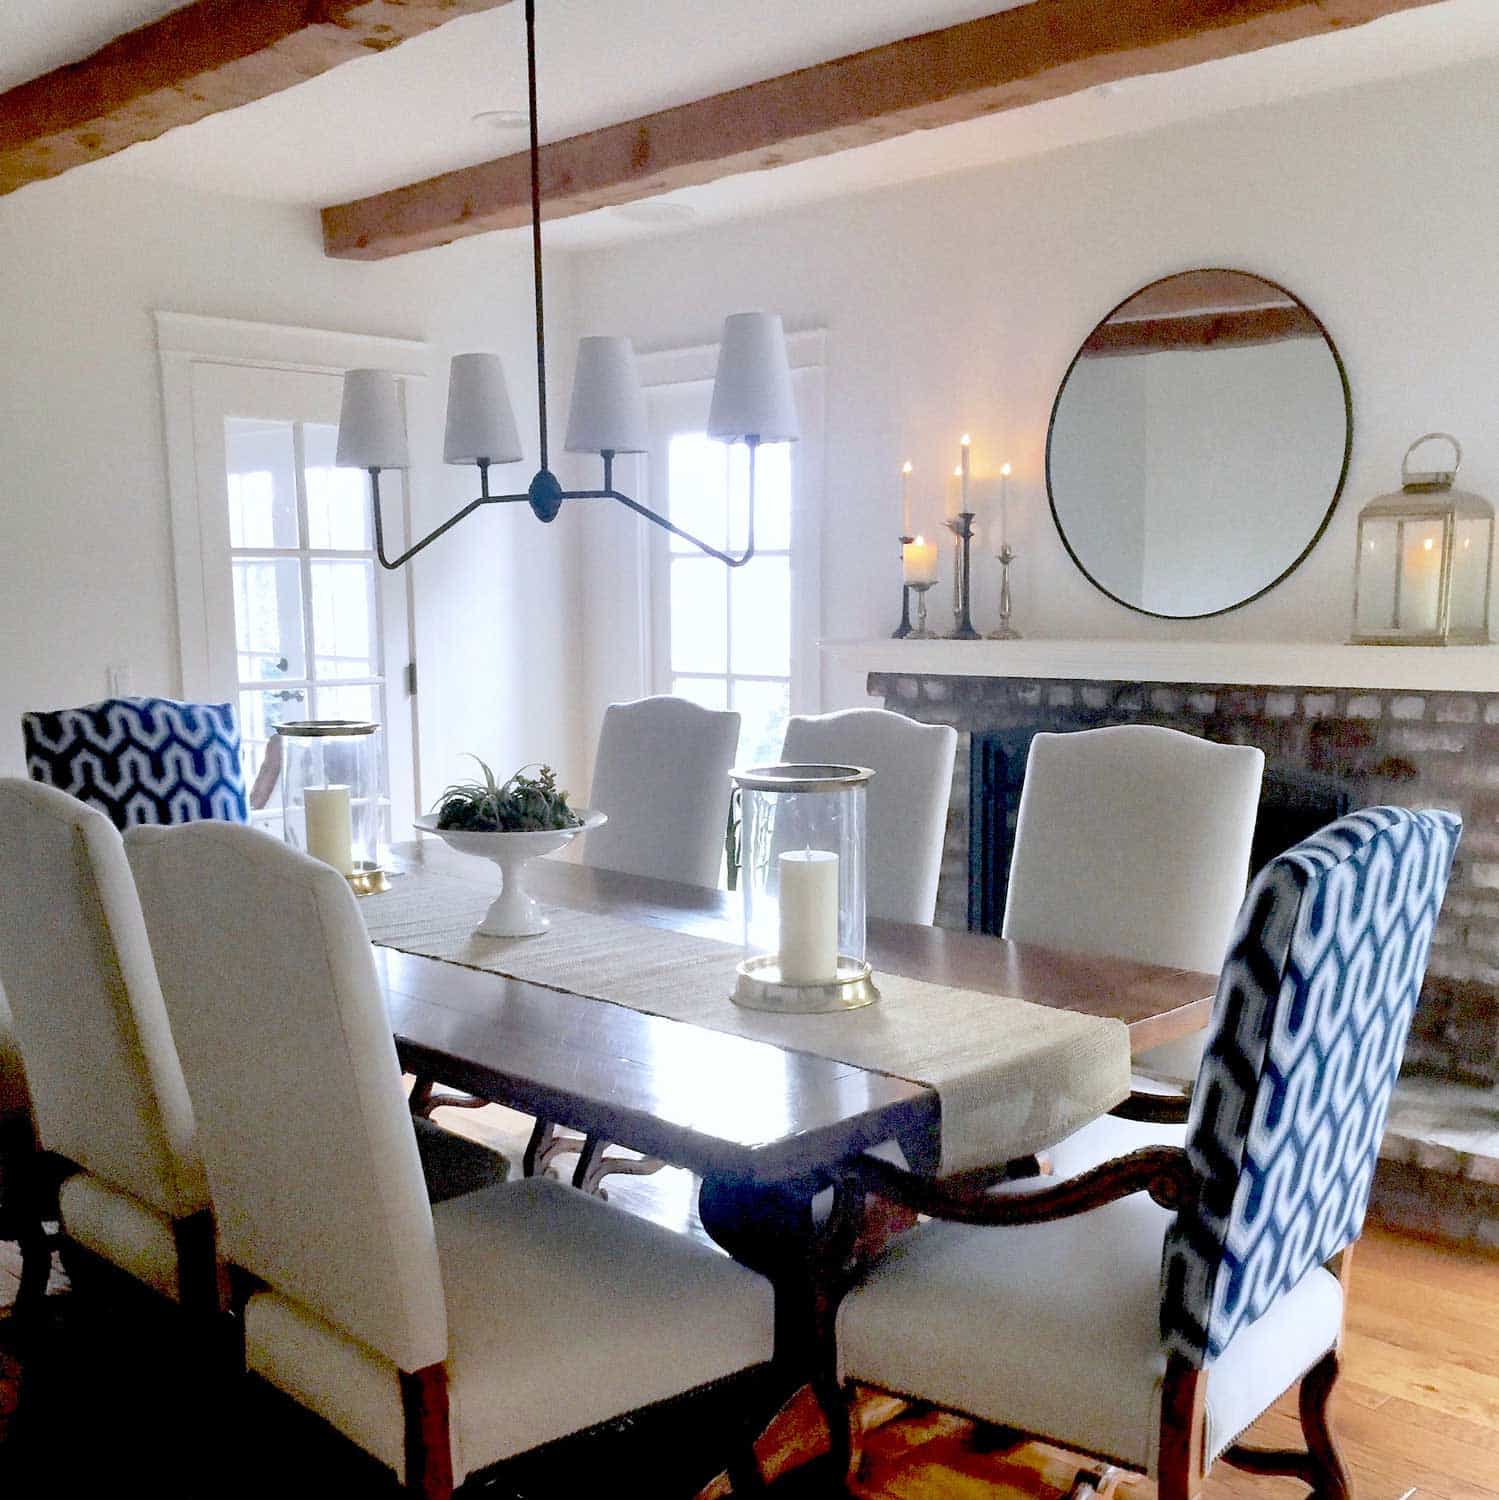 Tips For Your Dining Table Everyday, Centerpiece Ideas For Dining Room Table